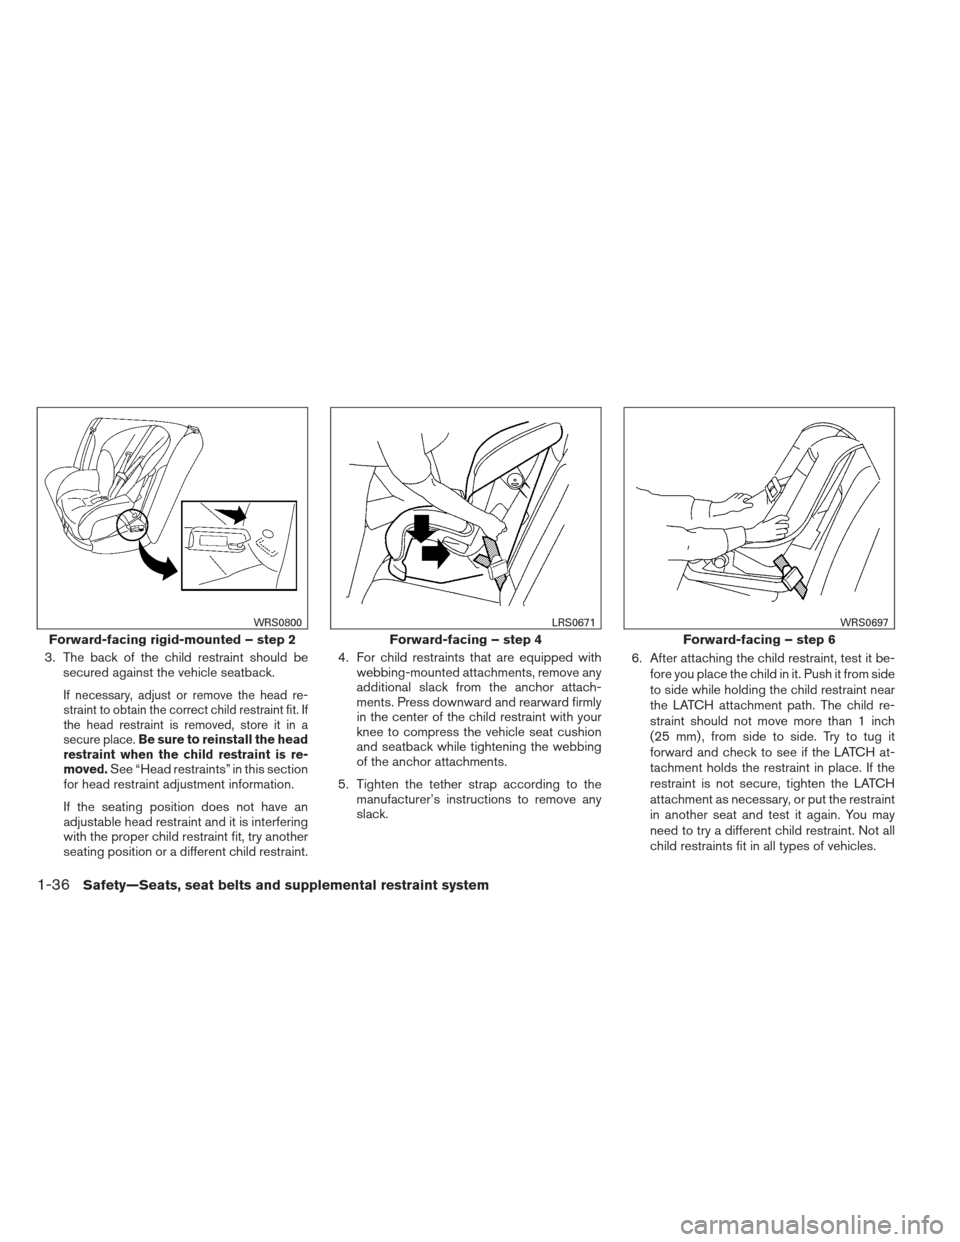 NISSAN XTERRA 2013 N50 / 2.G Workshop Manual 3. The back of the child restraint should besecured against the vehicle seatback.
If necessary, adjust or remove the head re-
straint to obtain the correct child restraint fit. If
the head restraint i